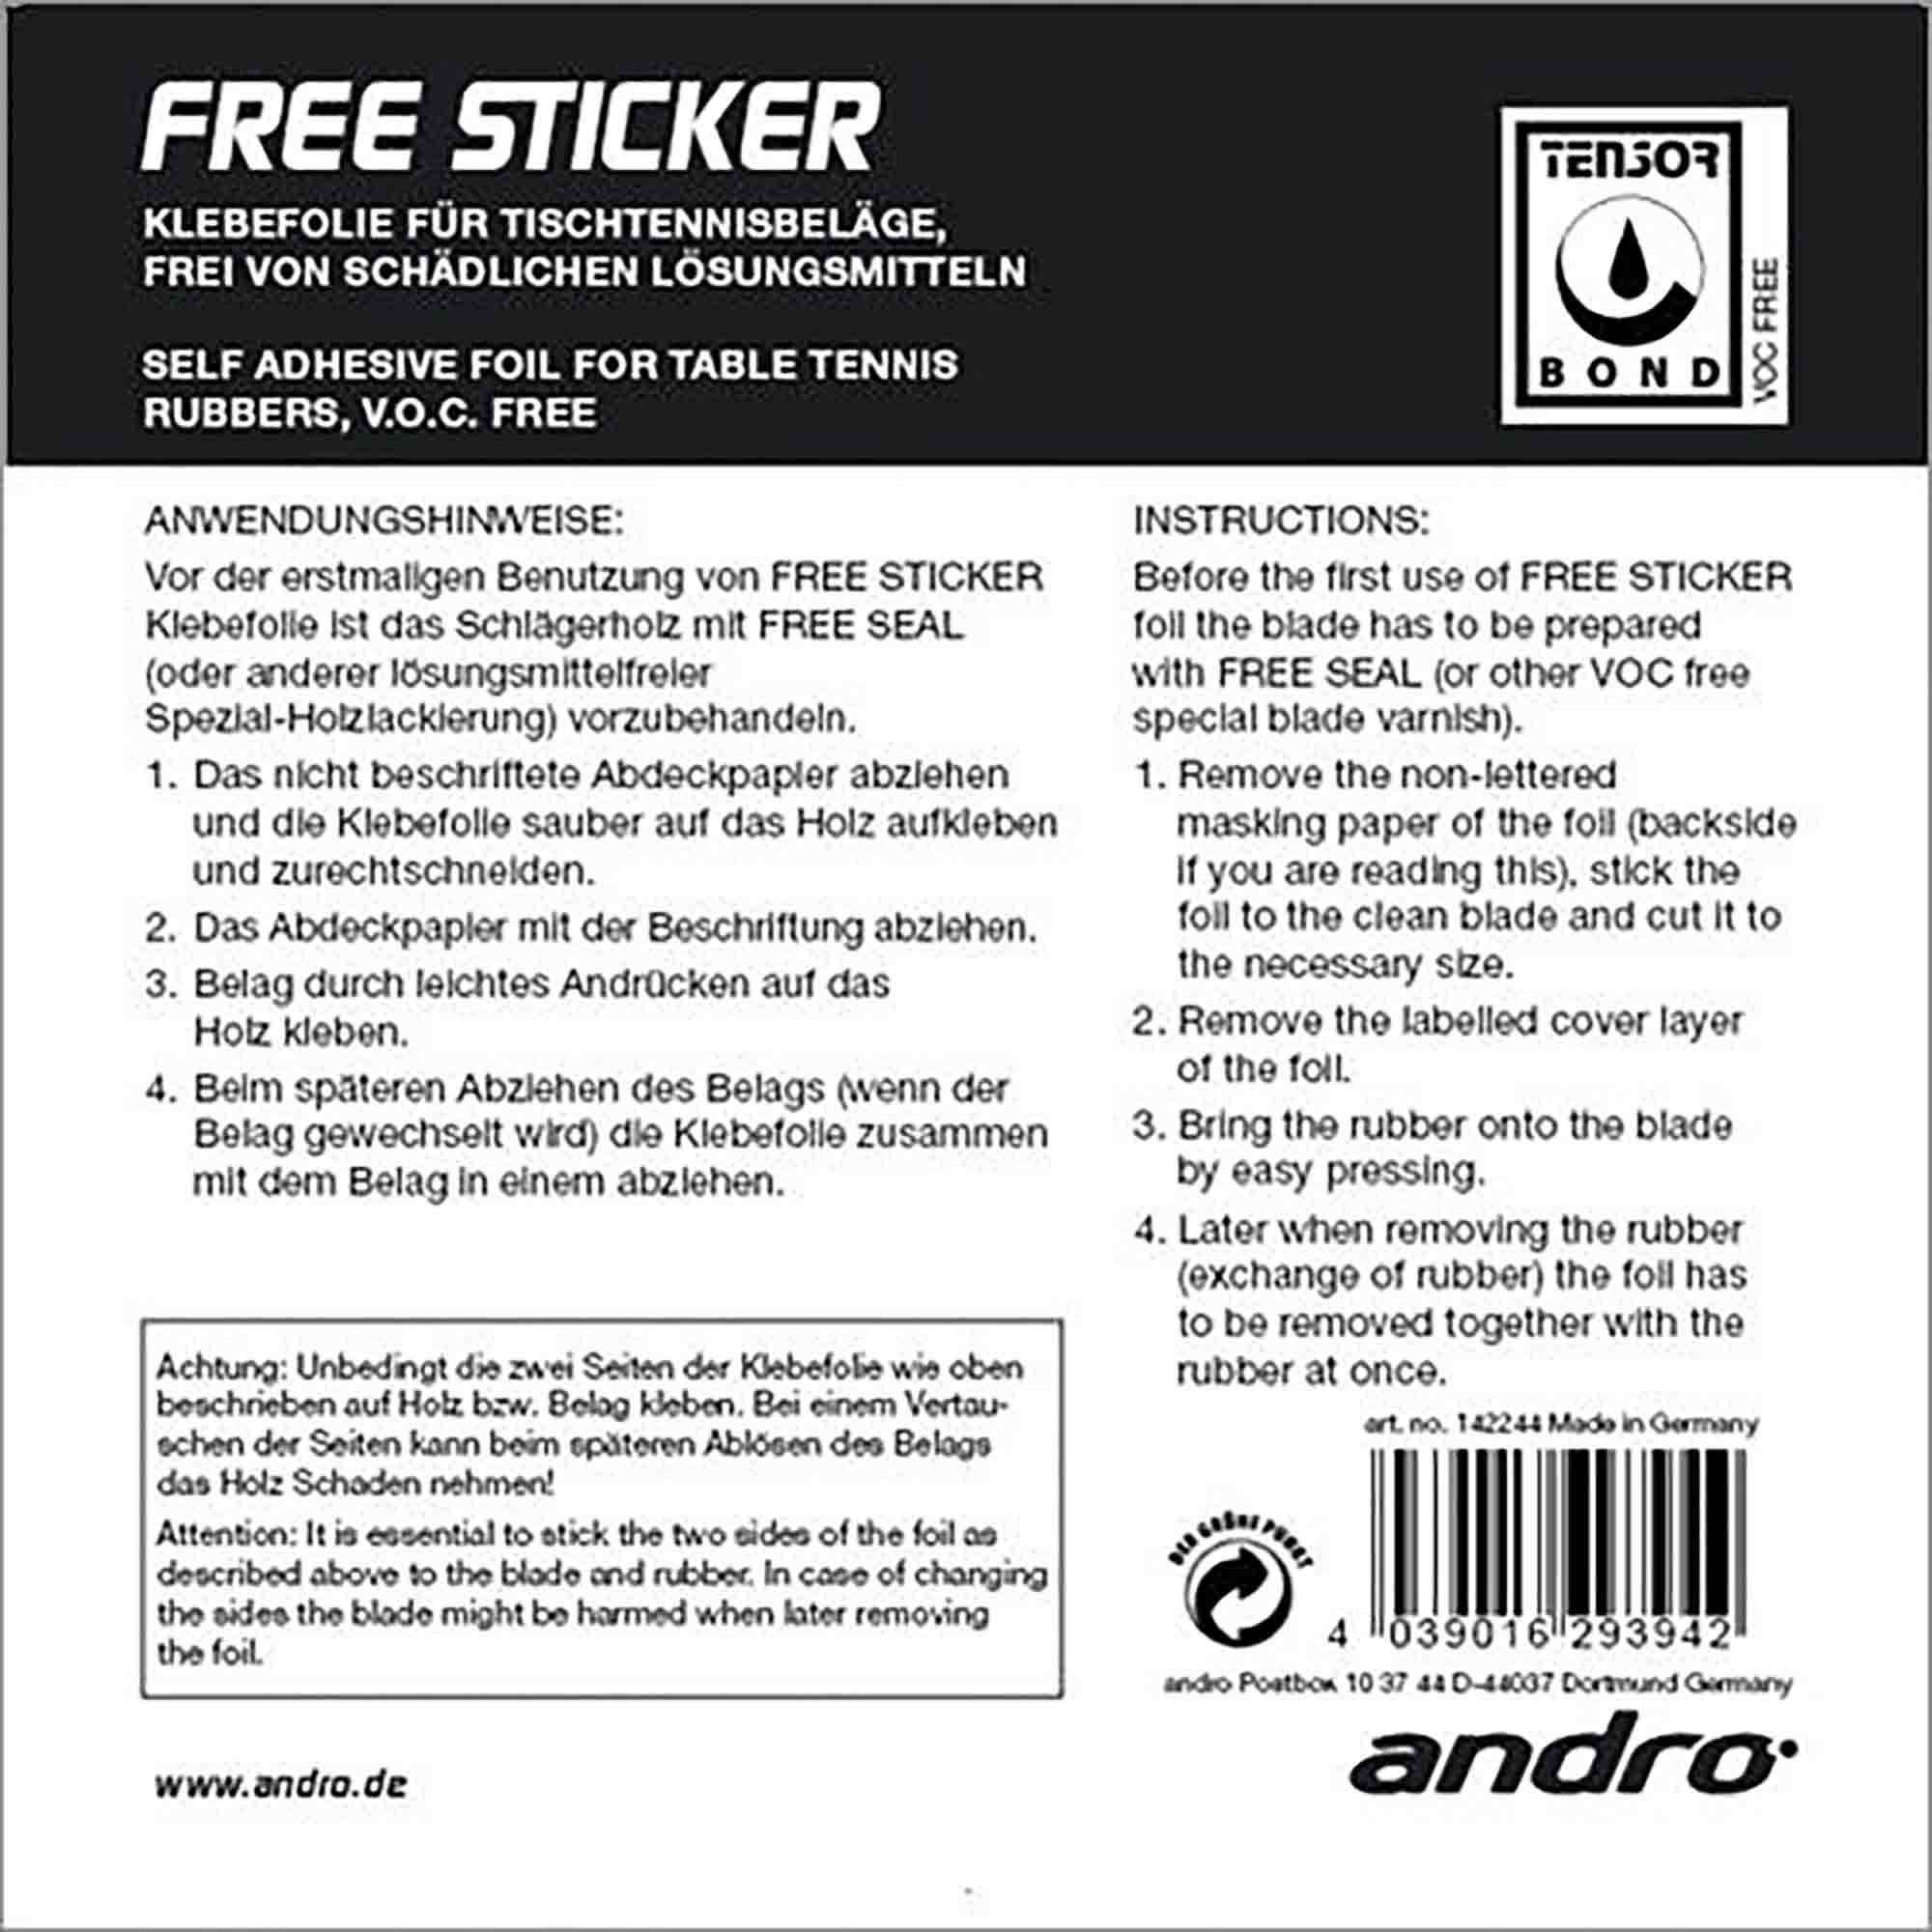 andro adhesive foil Free Sticker